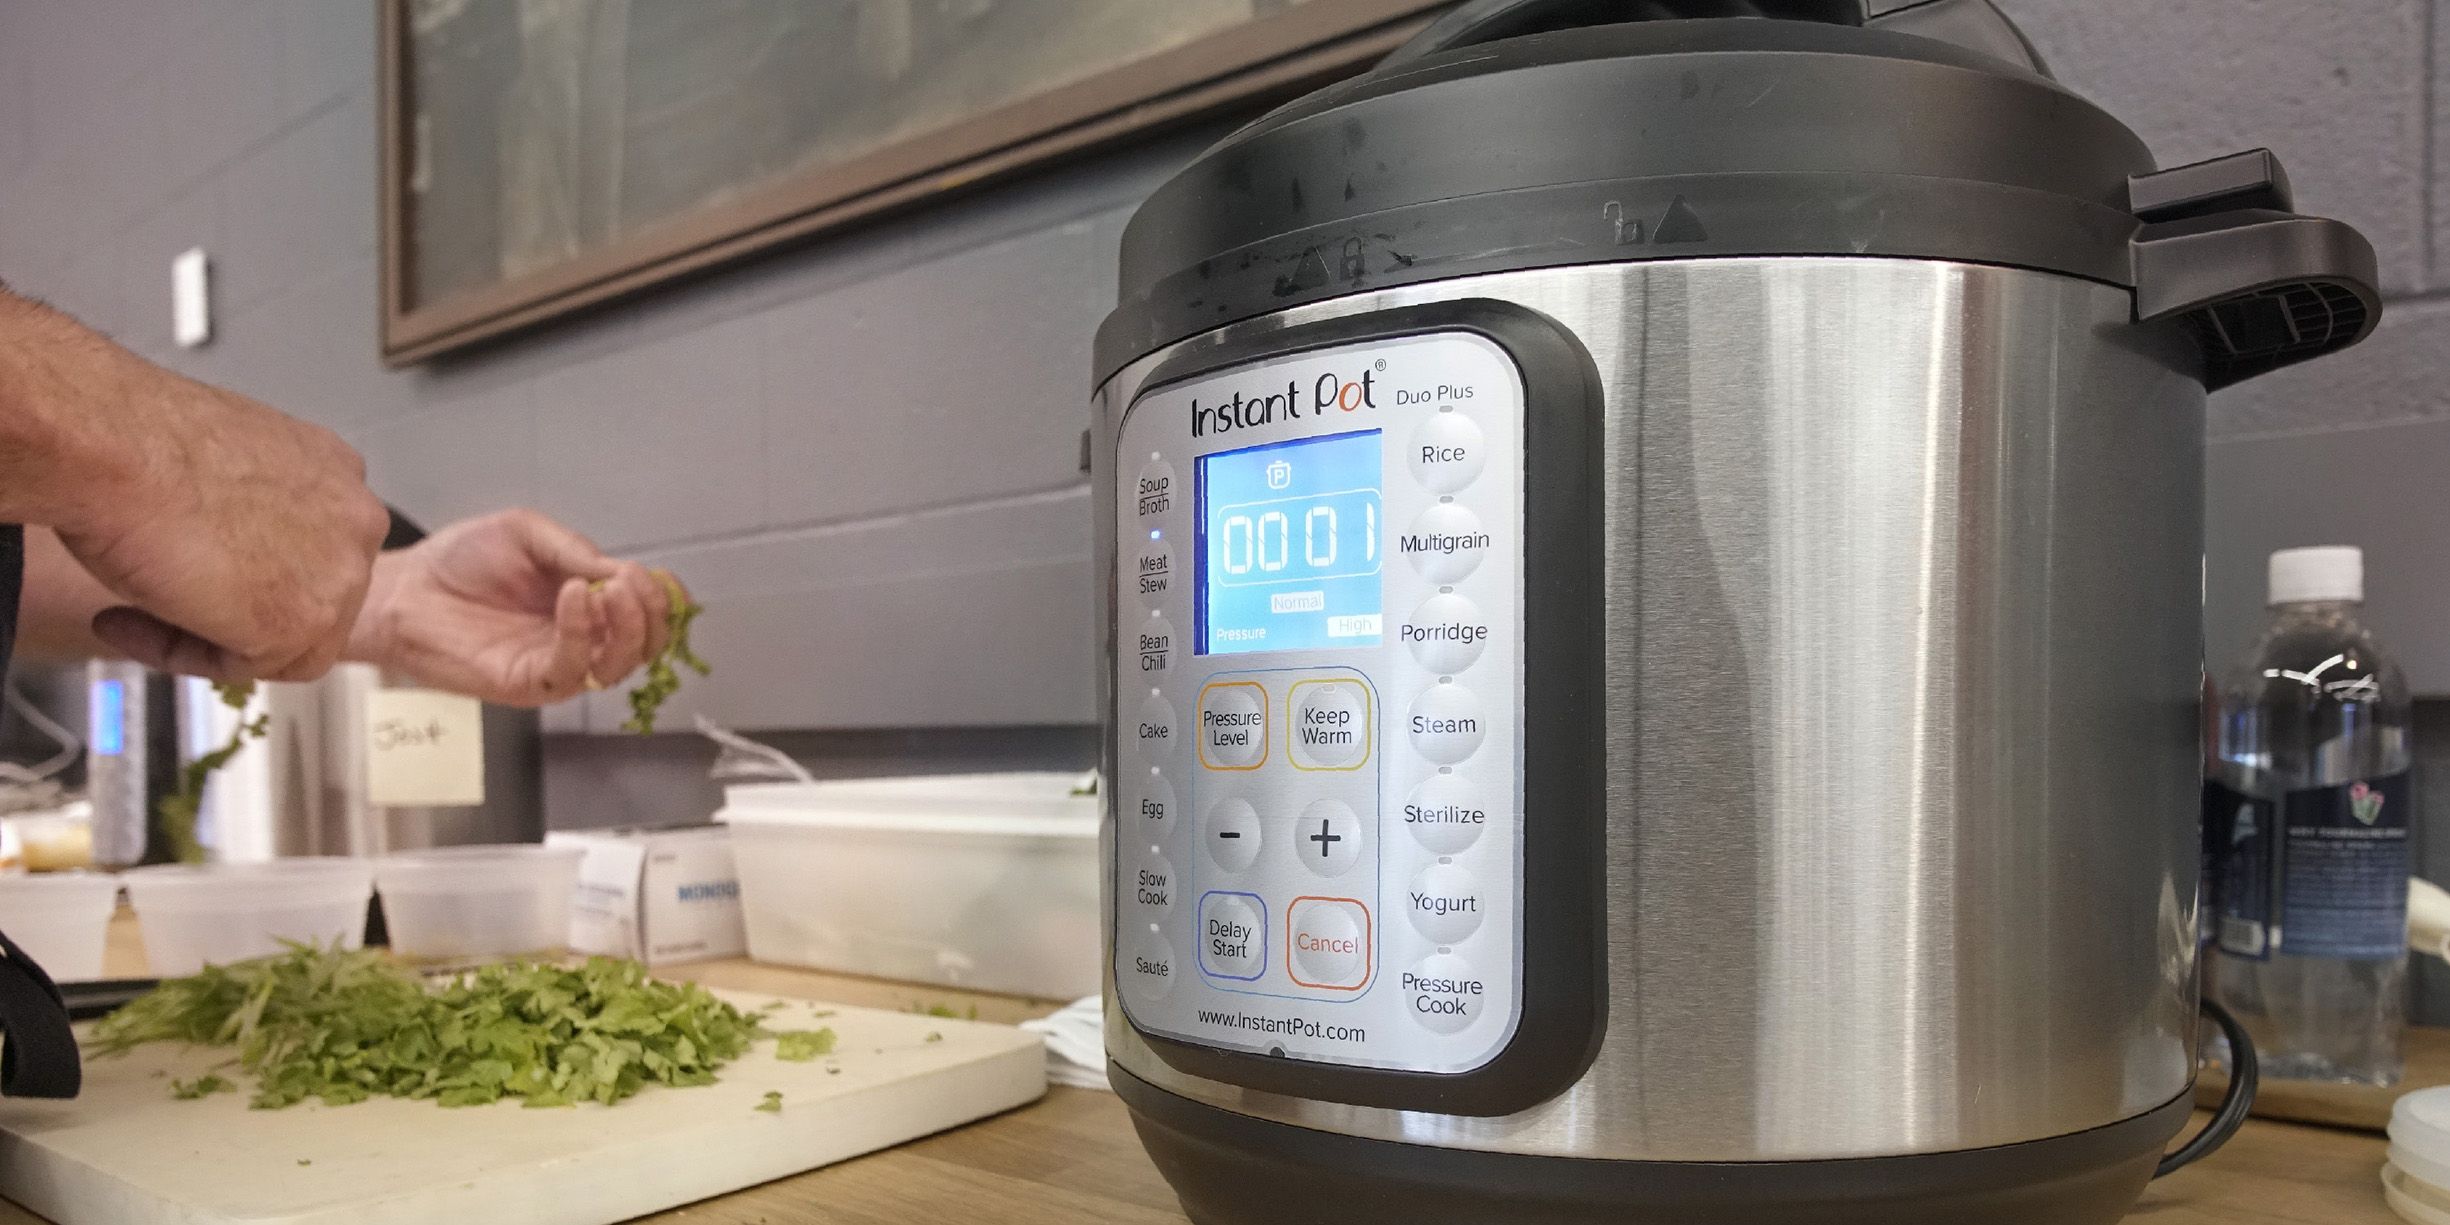 What is the procedure to eliminate odors from sealing ring of Instant Pot  Duo Plus?